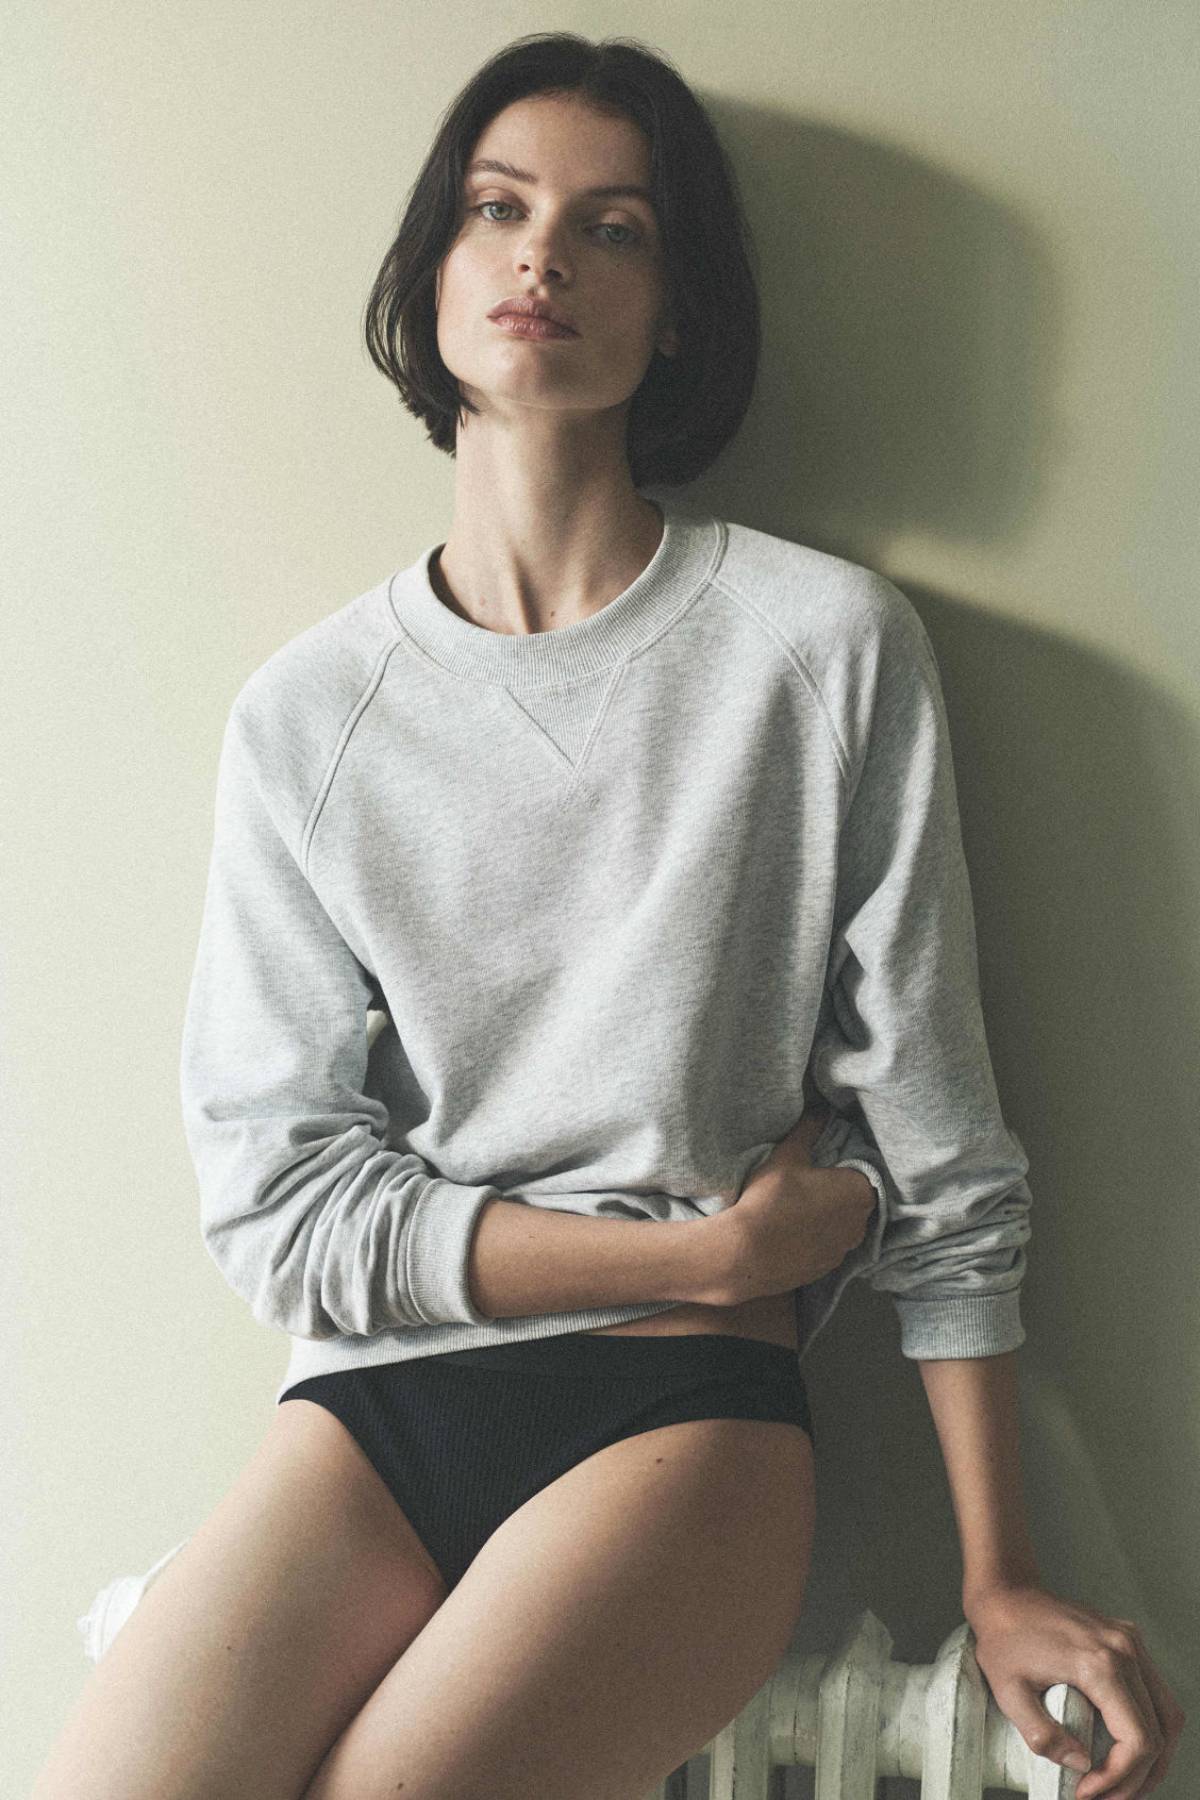 Women's Loungwear Pause by COS Fall-Winter 2021 Ad Campaign Clothing: COS LIGHT GRAY RELAXED-FIT TERRY SWEATSHIRT / COS BLACK RIBBED BRIEFS